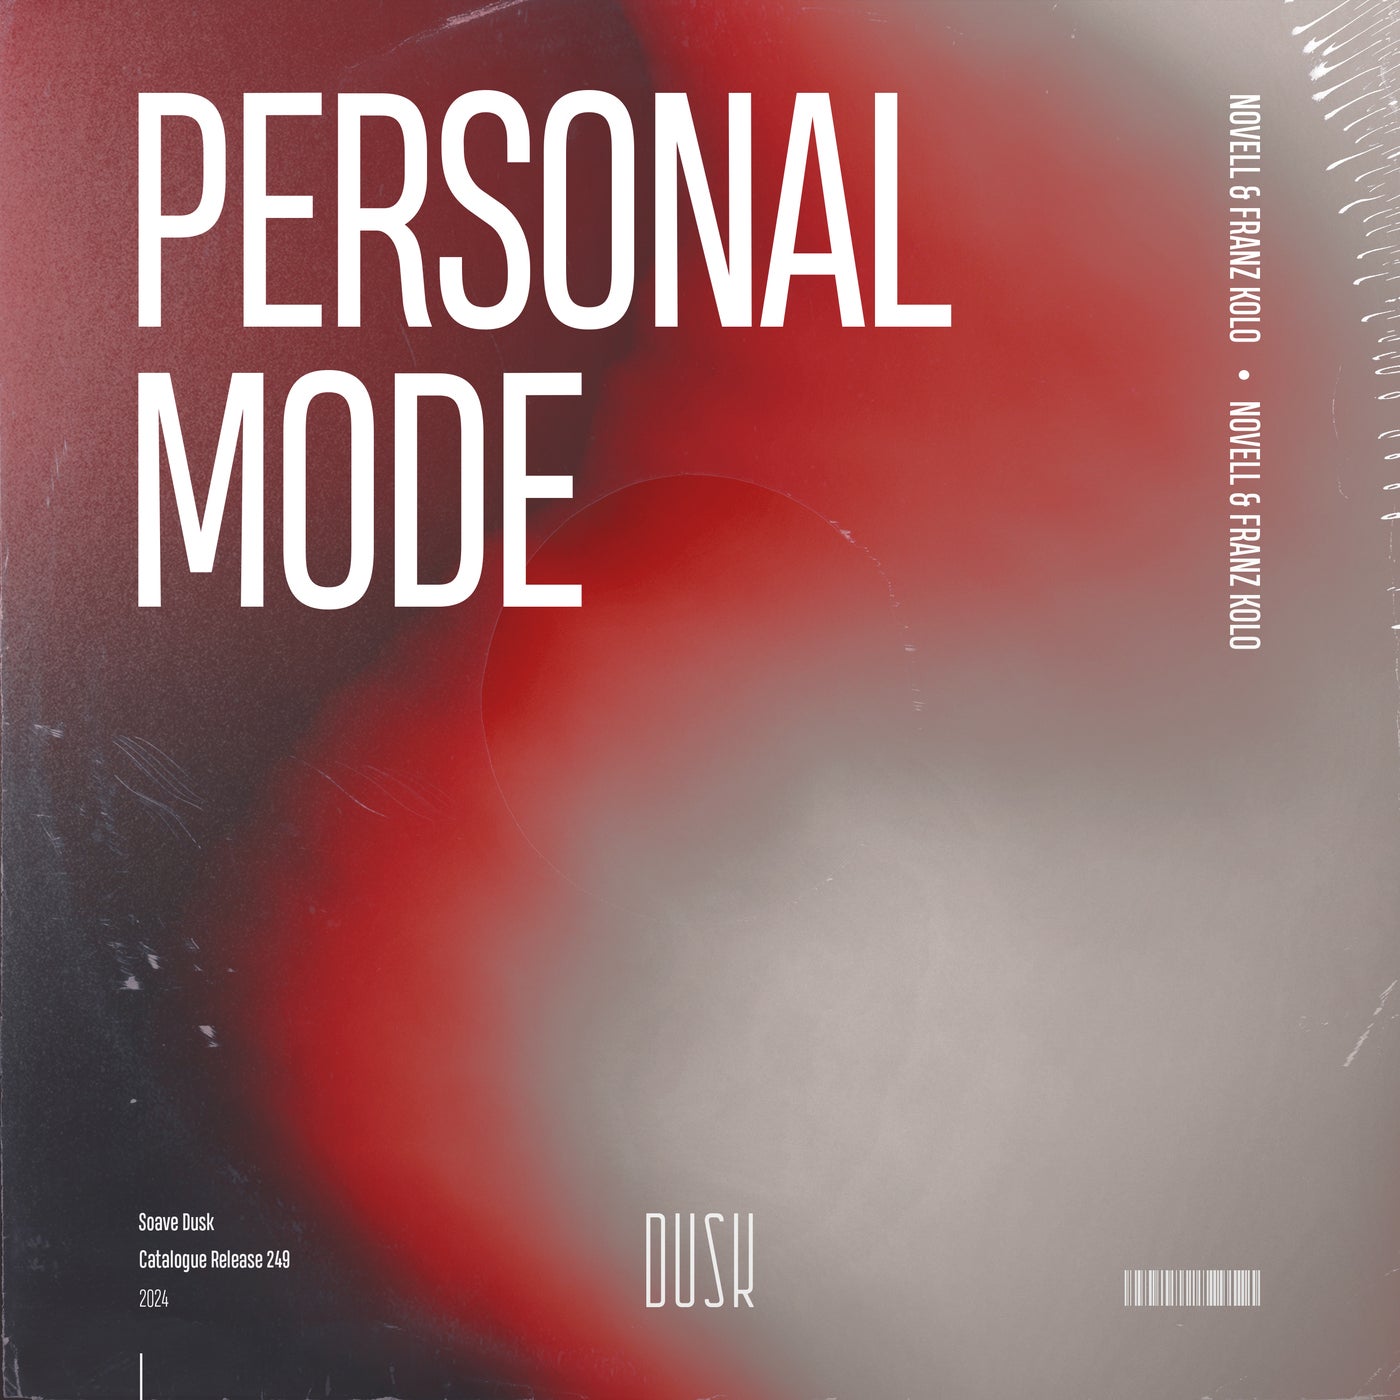 Personal Mode